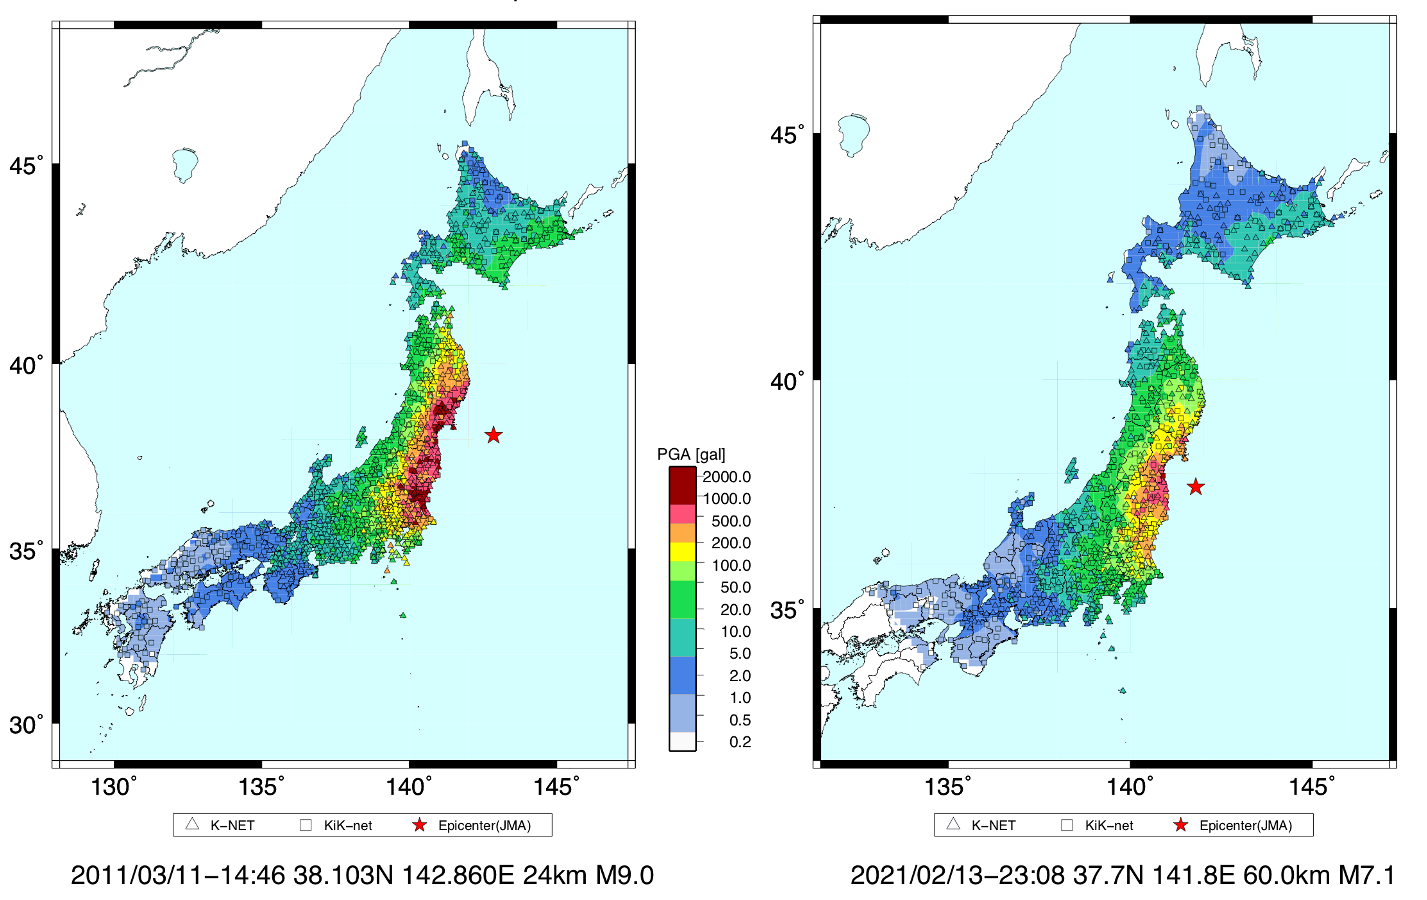 Maps showing the peak ground acceleration of the Mw 9.1 event (11 March 2011) and of the Mw 7.1 event (13 February 2021) (Source: NIED, K-Net, KiK-net)